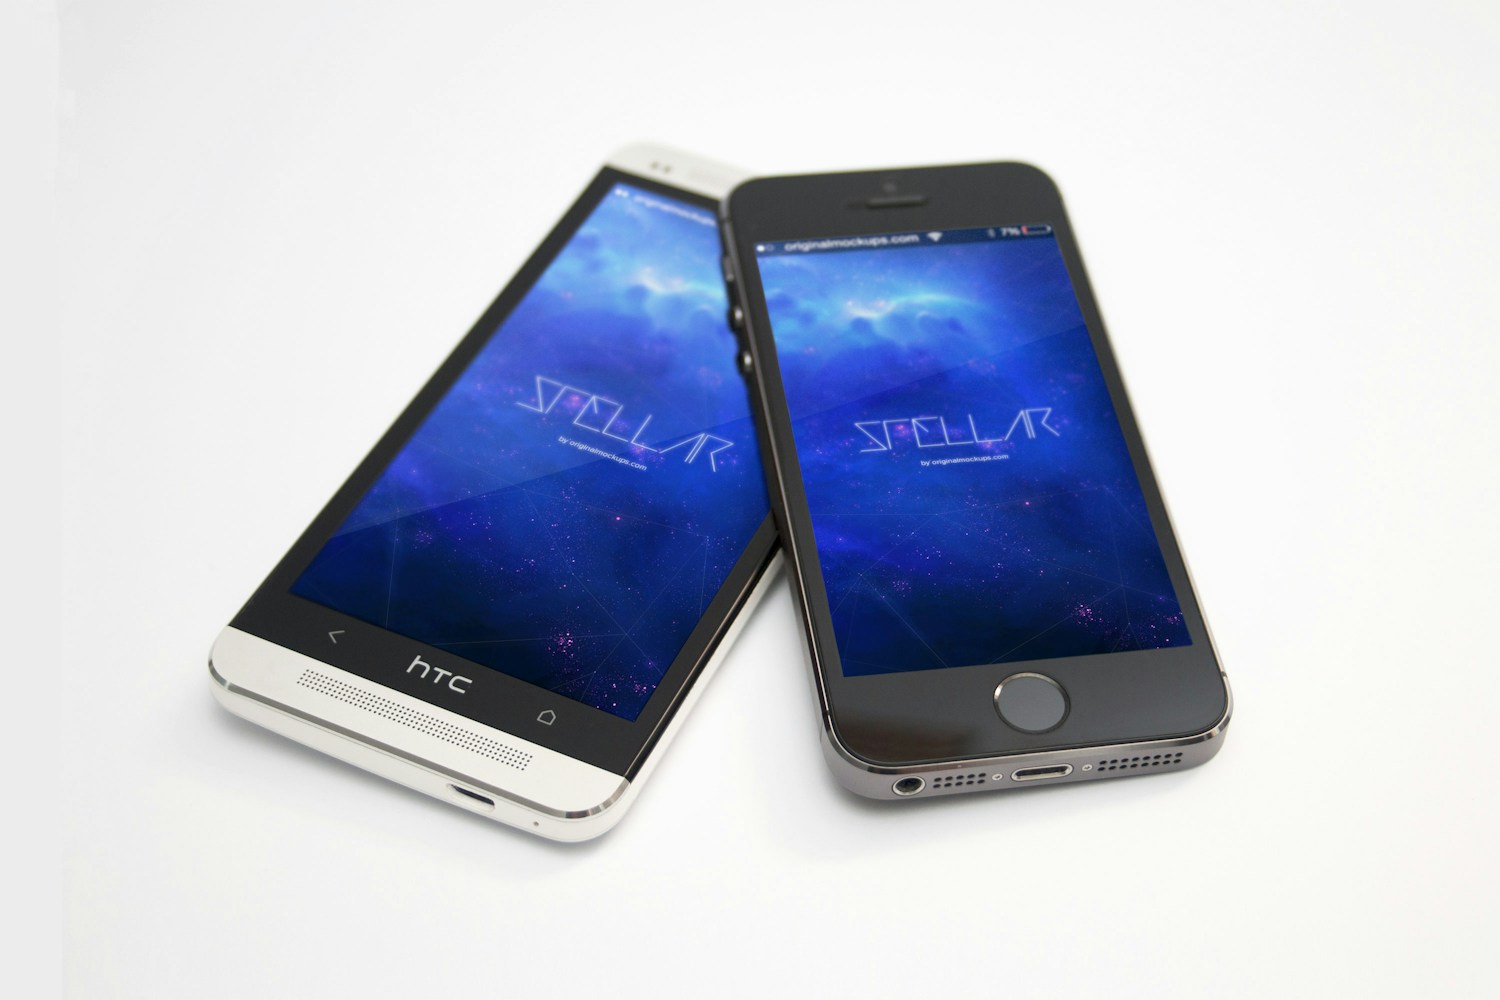 HTC One M7 and iPhone 5s Space Gray Mockup 01